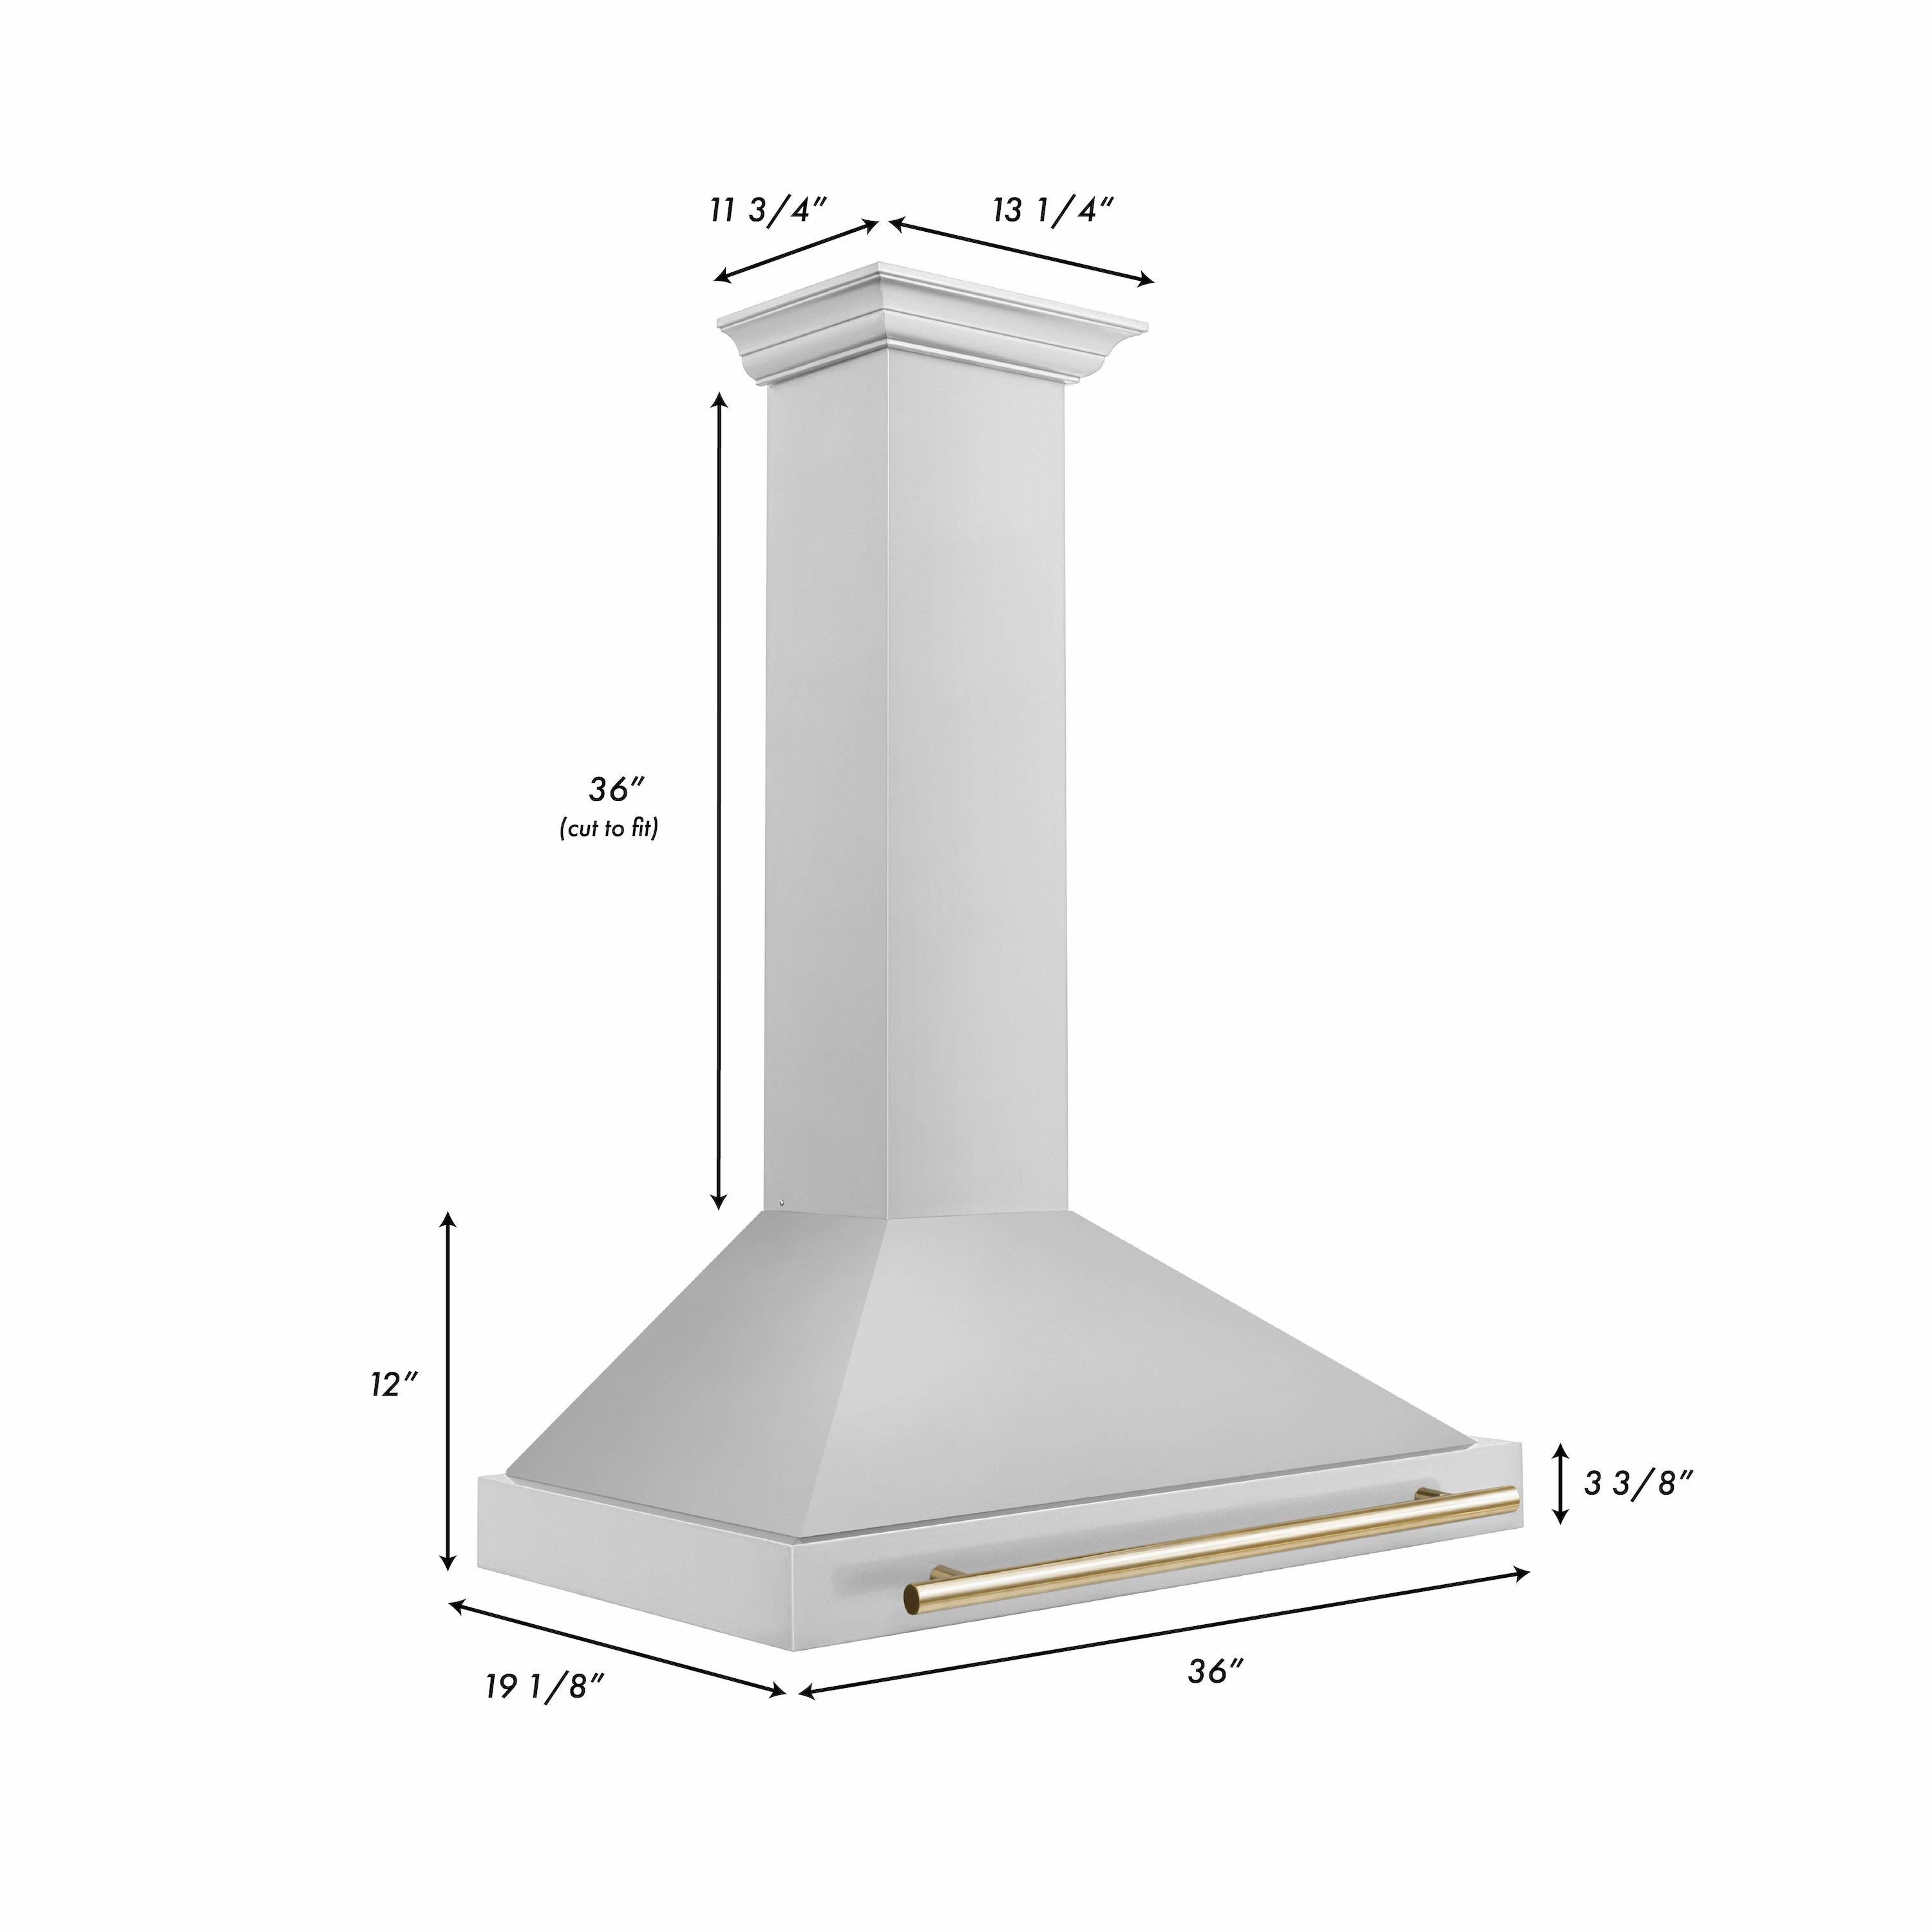 ZLINE 36 in. Autograph Edition Convertible Stainless Steel Range Hood with Stainless Steel Shell and Polished Polished Gold Accents (KB4STZ-36-G)